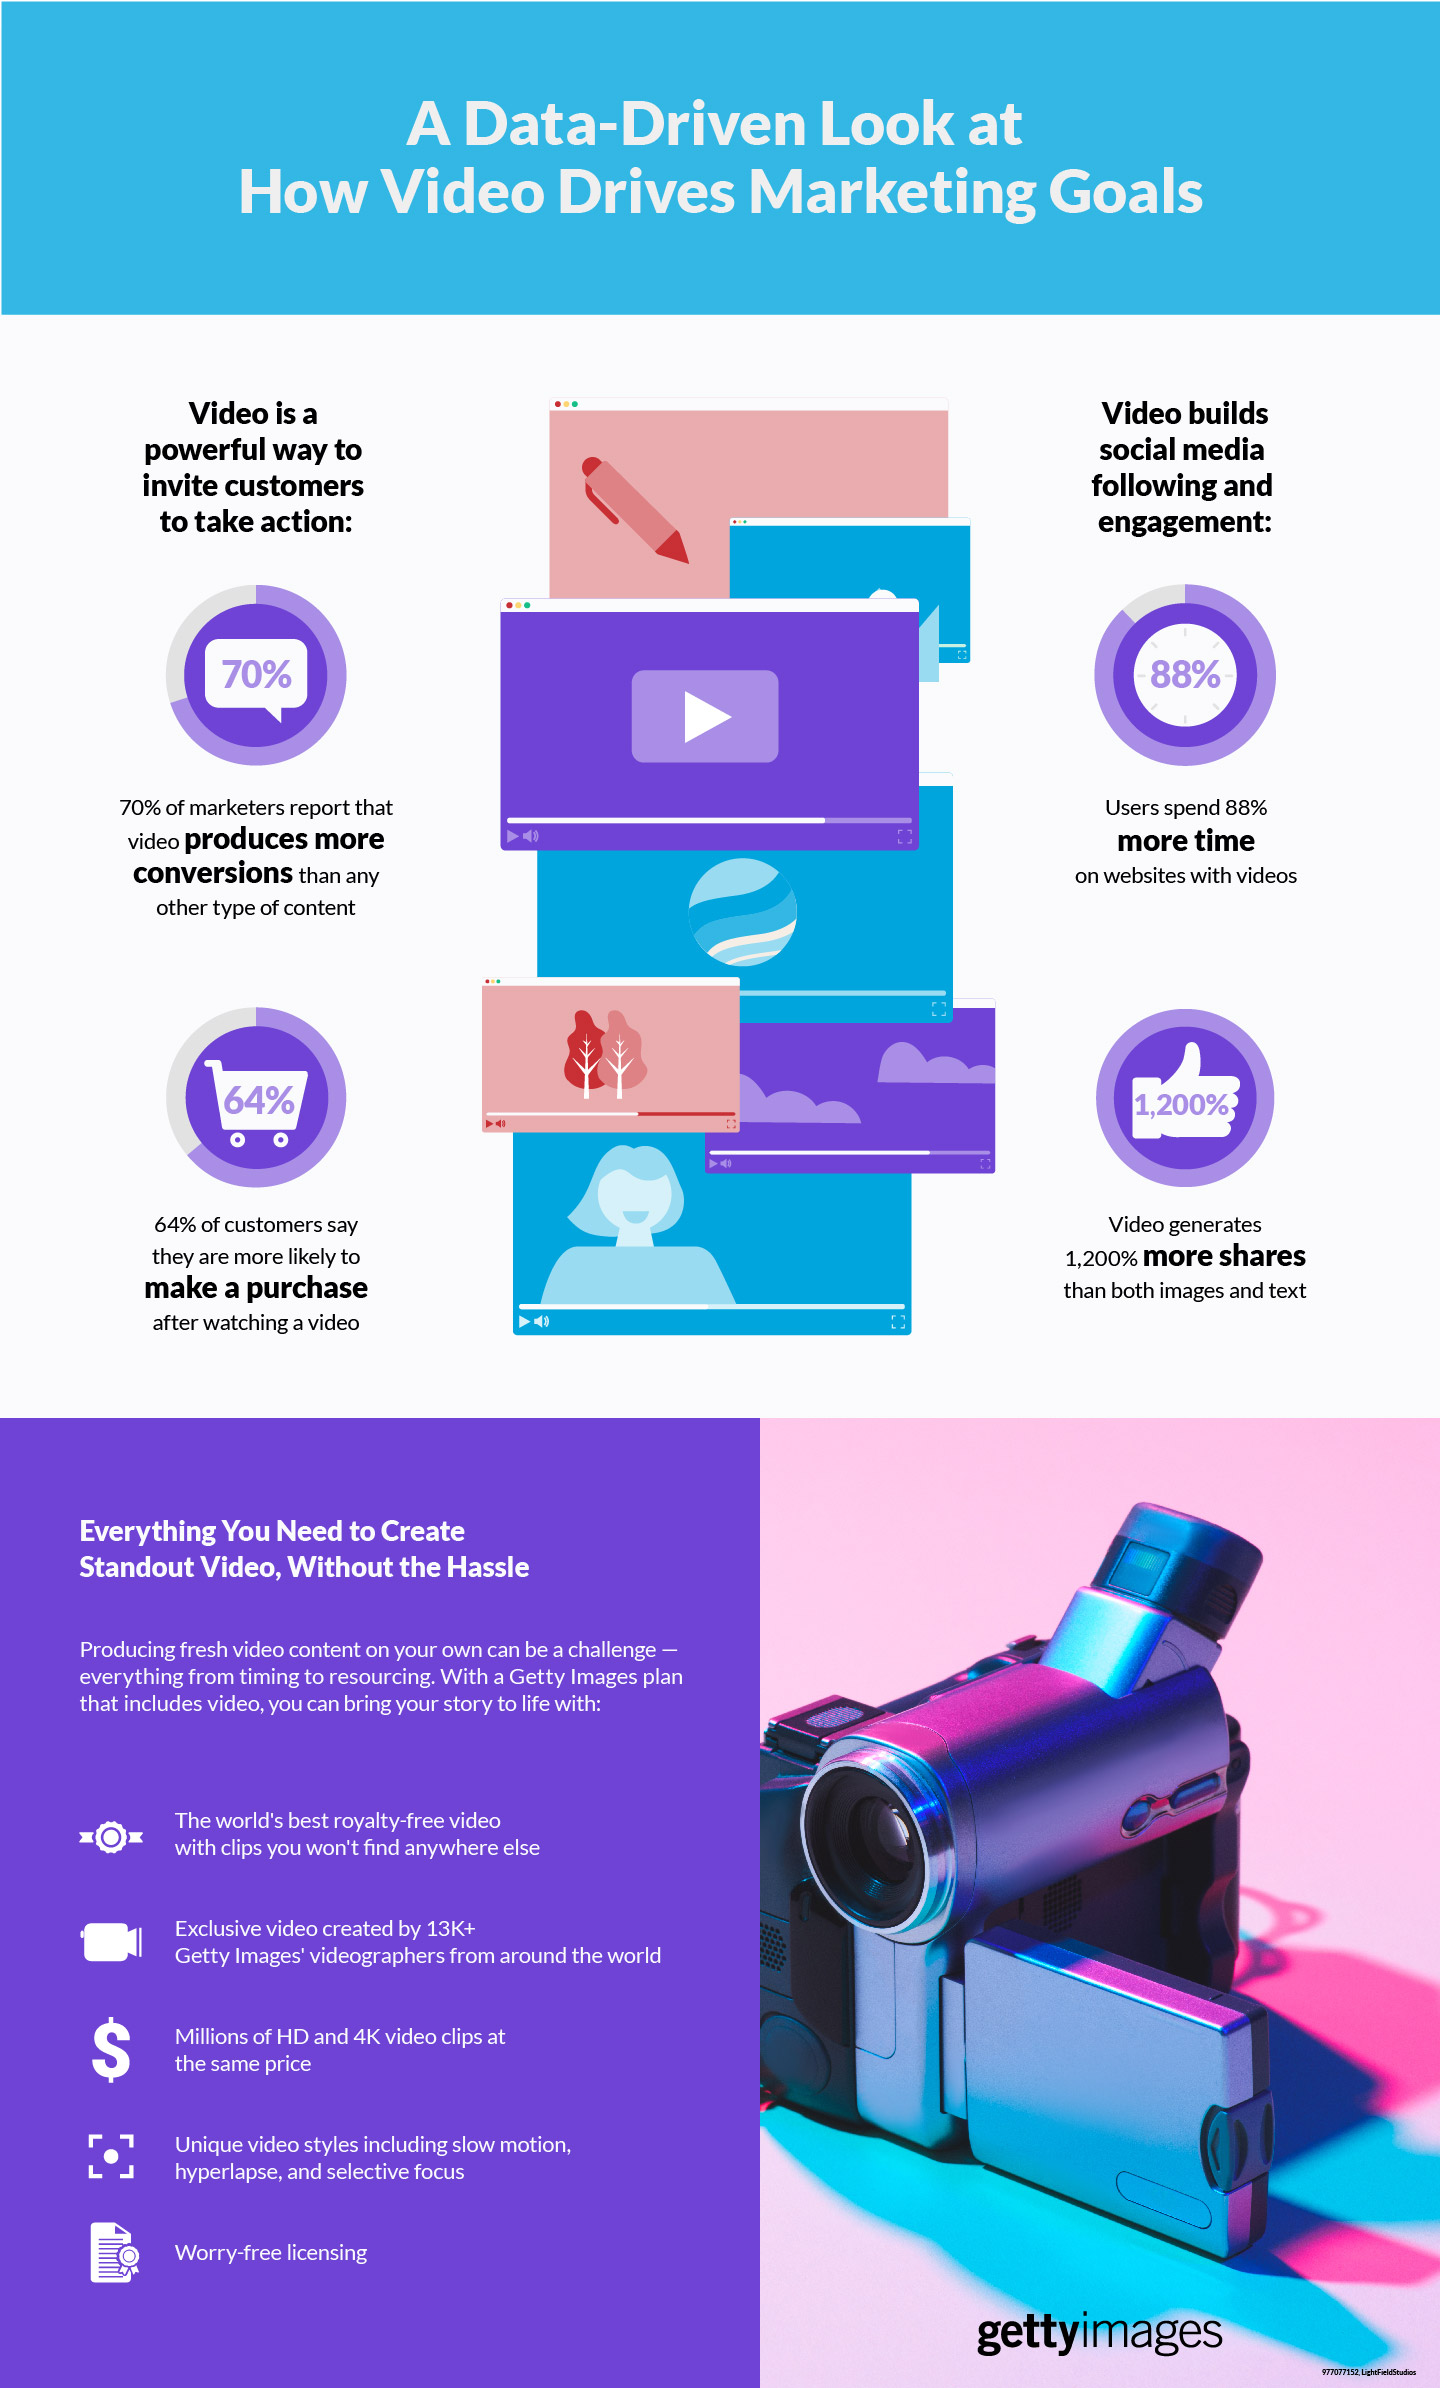 Getty_A_DataDriven_Look_at_How_Video_Drive_Infographic_1440-01.jpg